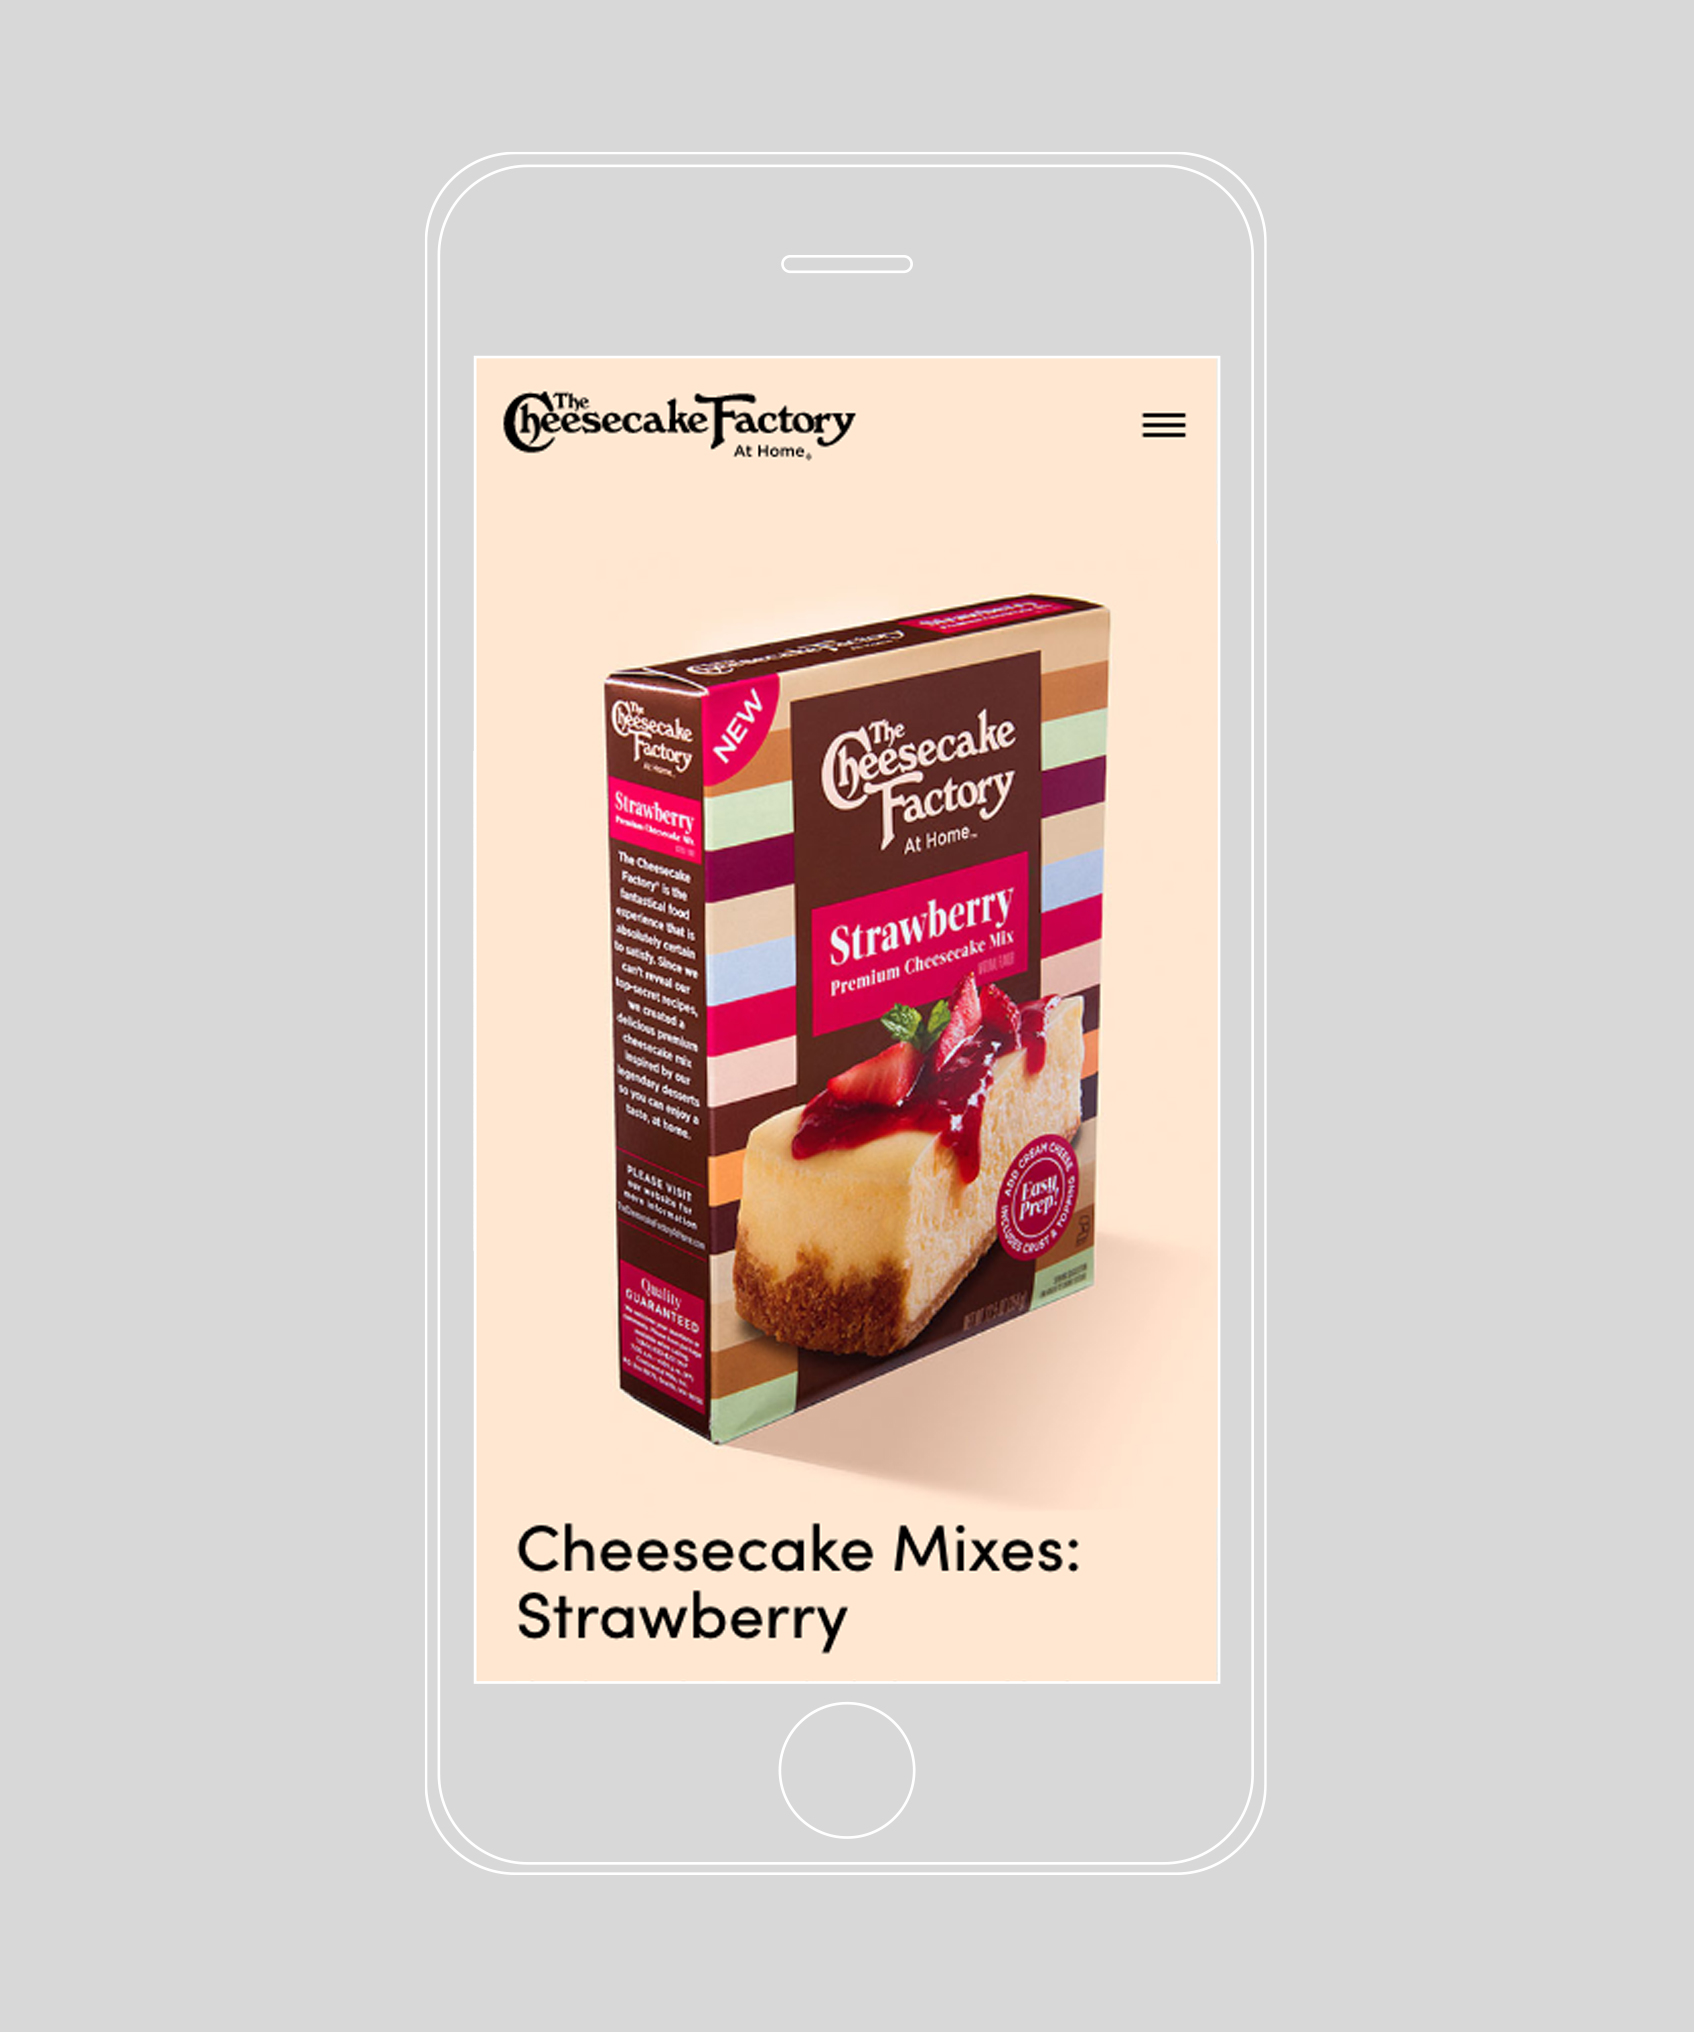 The Cheesecake Factory at Home Mobile